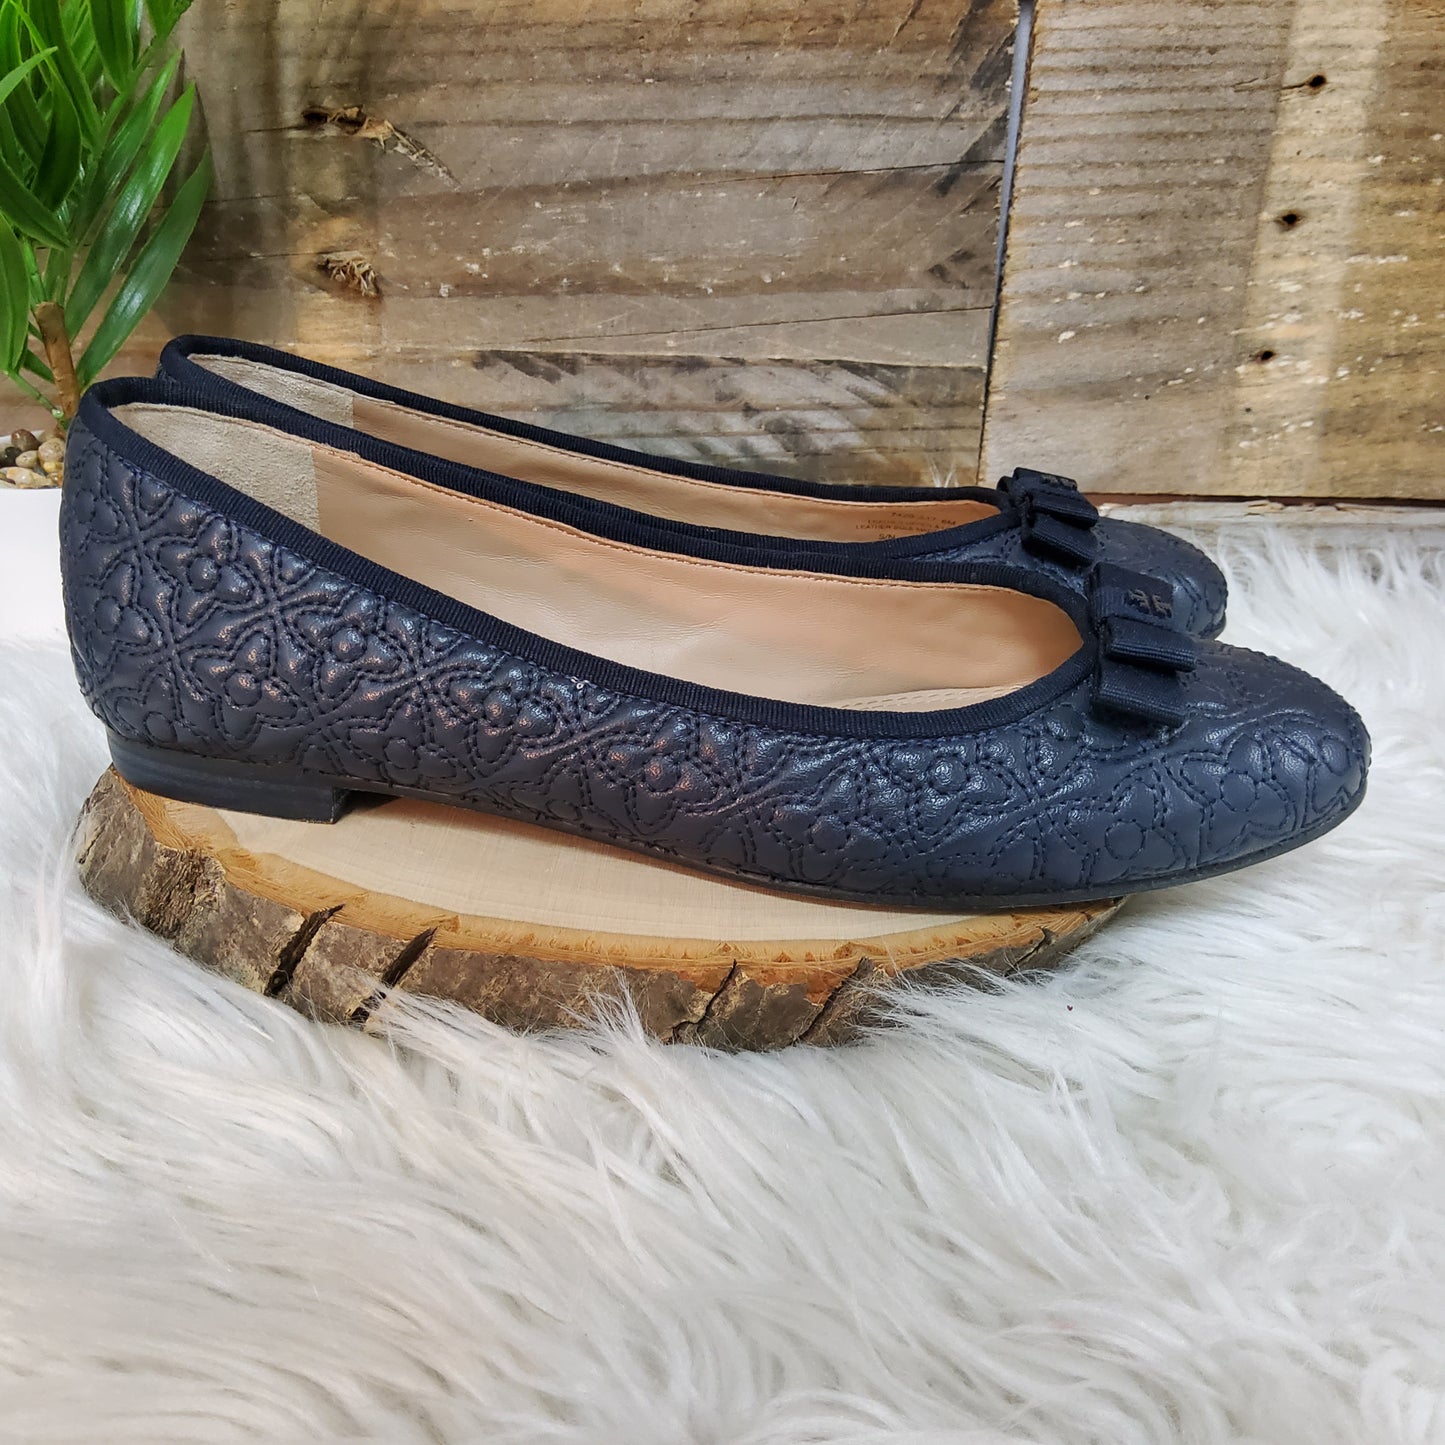 Tory Burch Quilted Navy Flats Sz 8